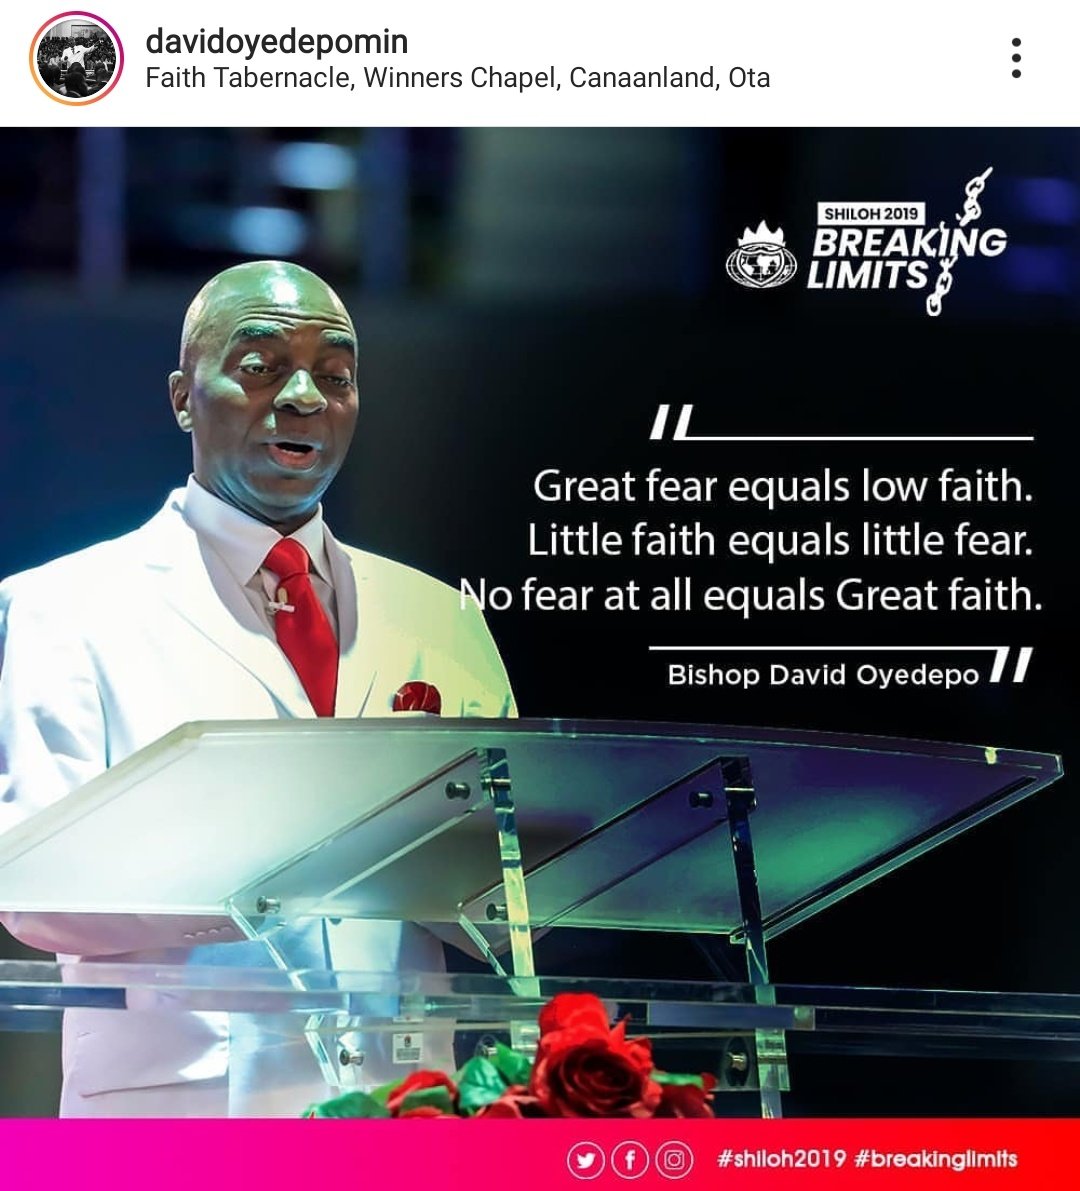 No fear at all equals great faith. Happy Shiloh 2019 week. #shiloh2019breakinglimits #Shiloh2019